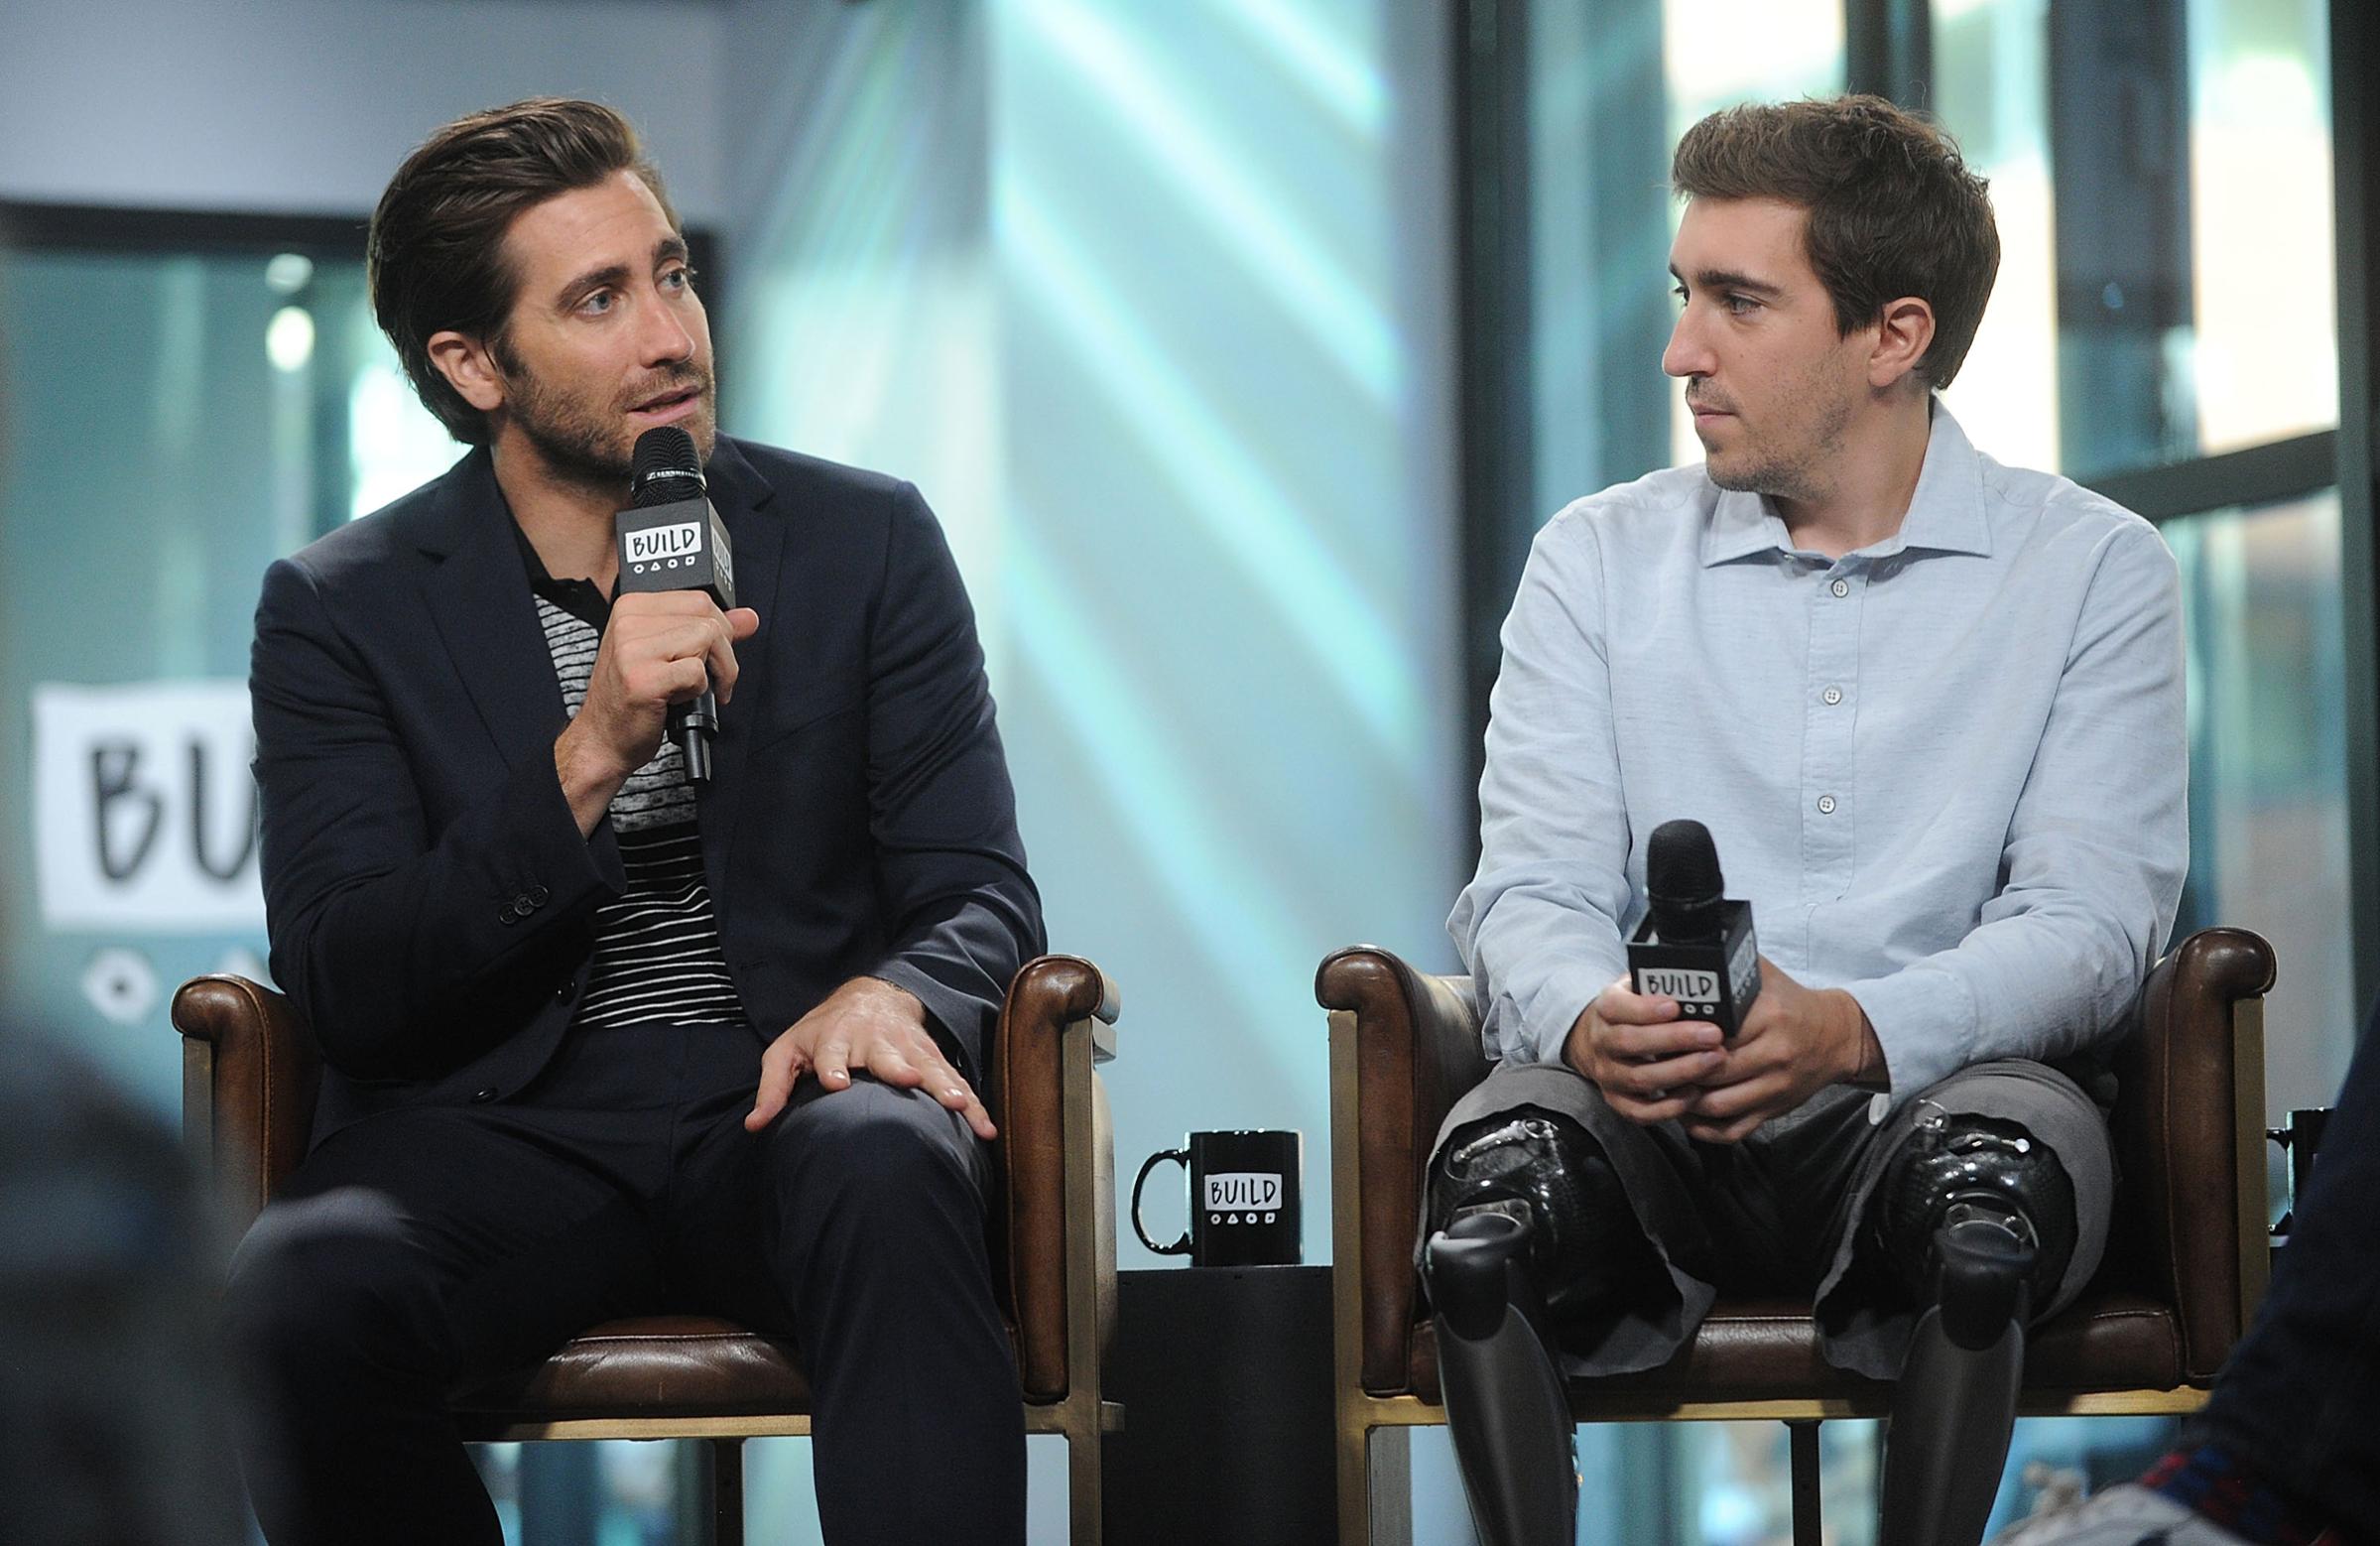 Jake Gyllenhaal, left, and Jeff Bauman attend Build Presents The Cast Of 'Stronger' at Build Studio in New York City on Sept. 15, 2017.